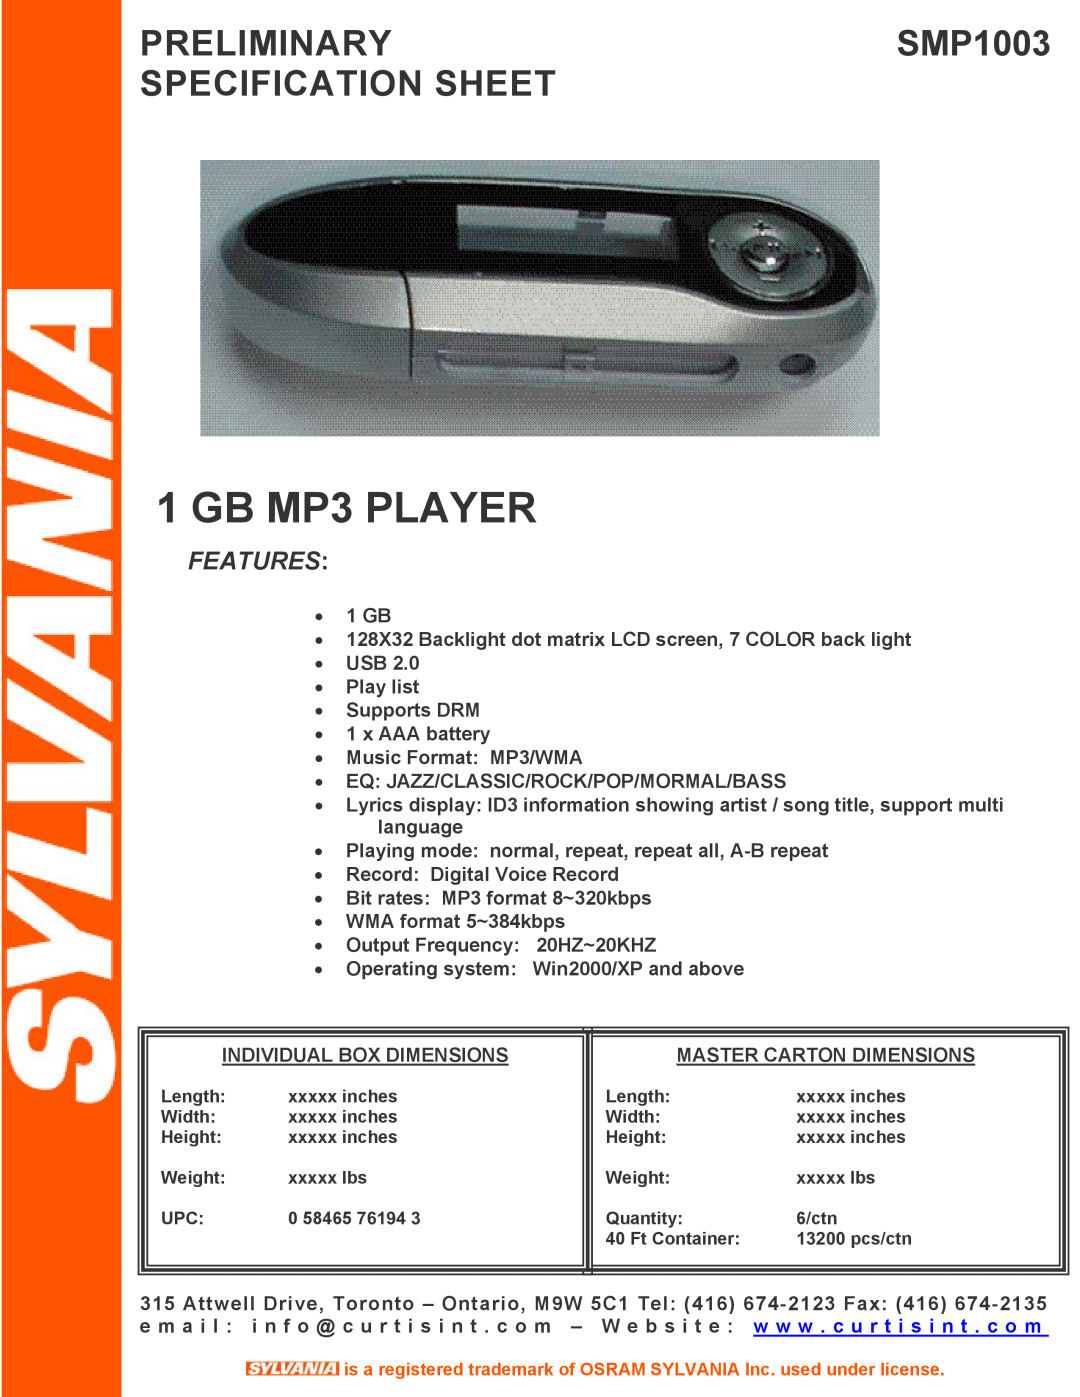 Sylvania specifications GB MP3 PLAYER, PRELIMINARYSMP1003 SPECIFICATION SHEET, Features 